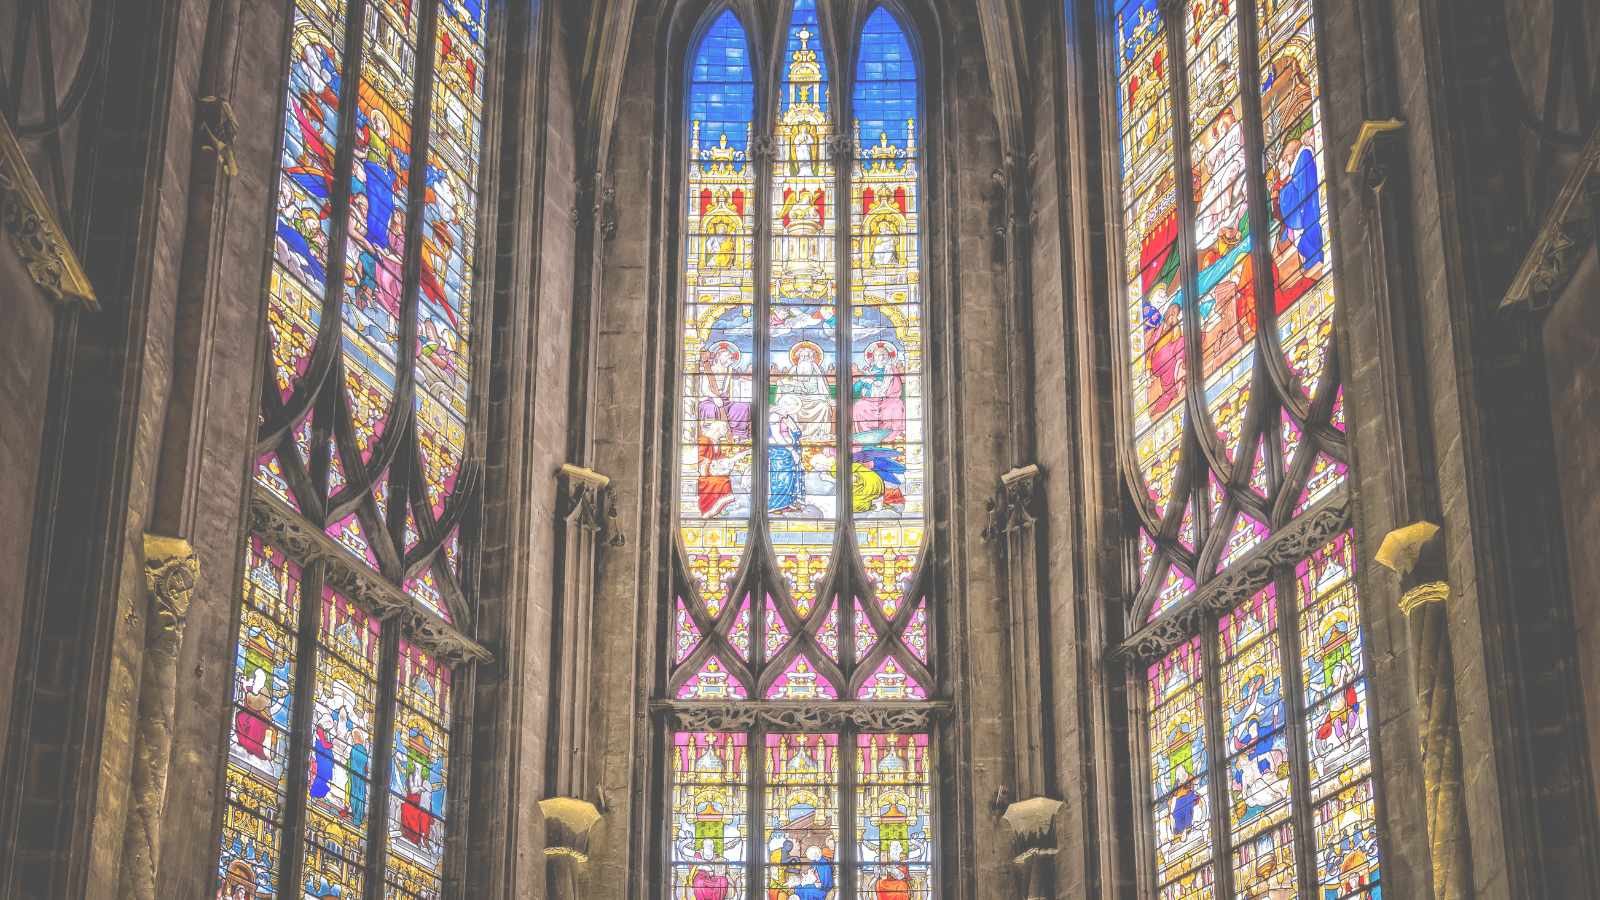 Stained Glass windows from a church